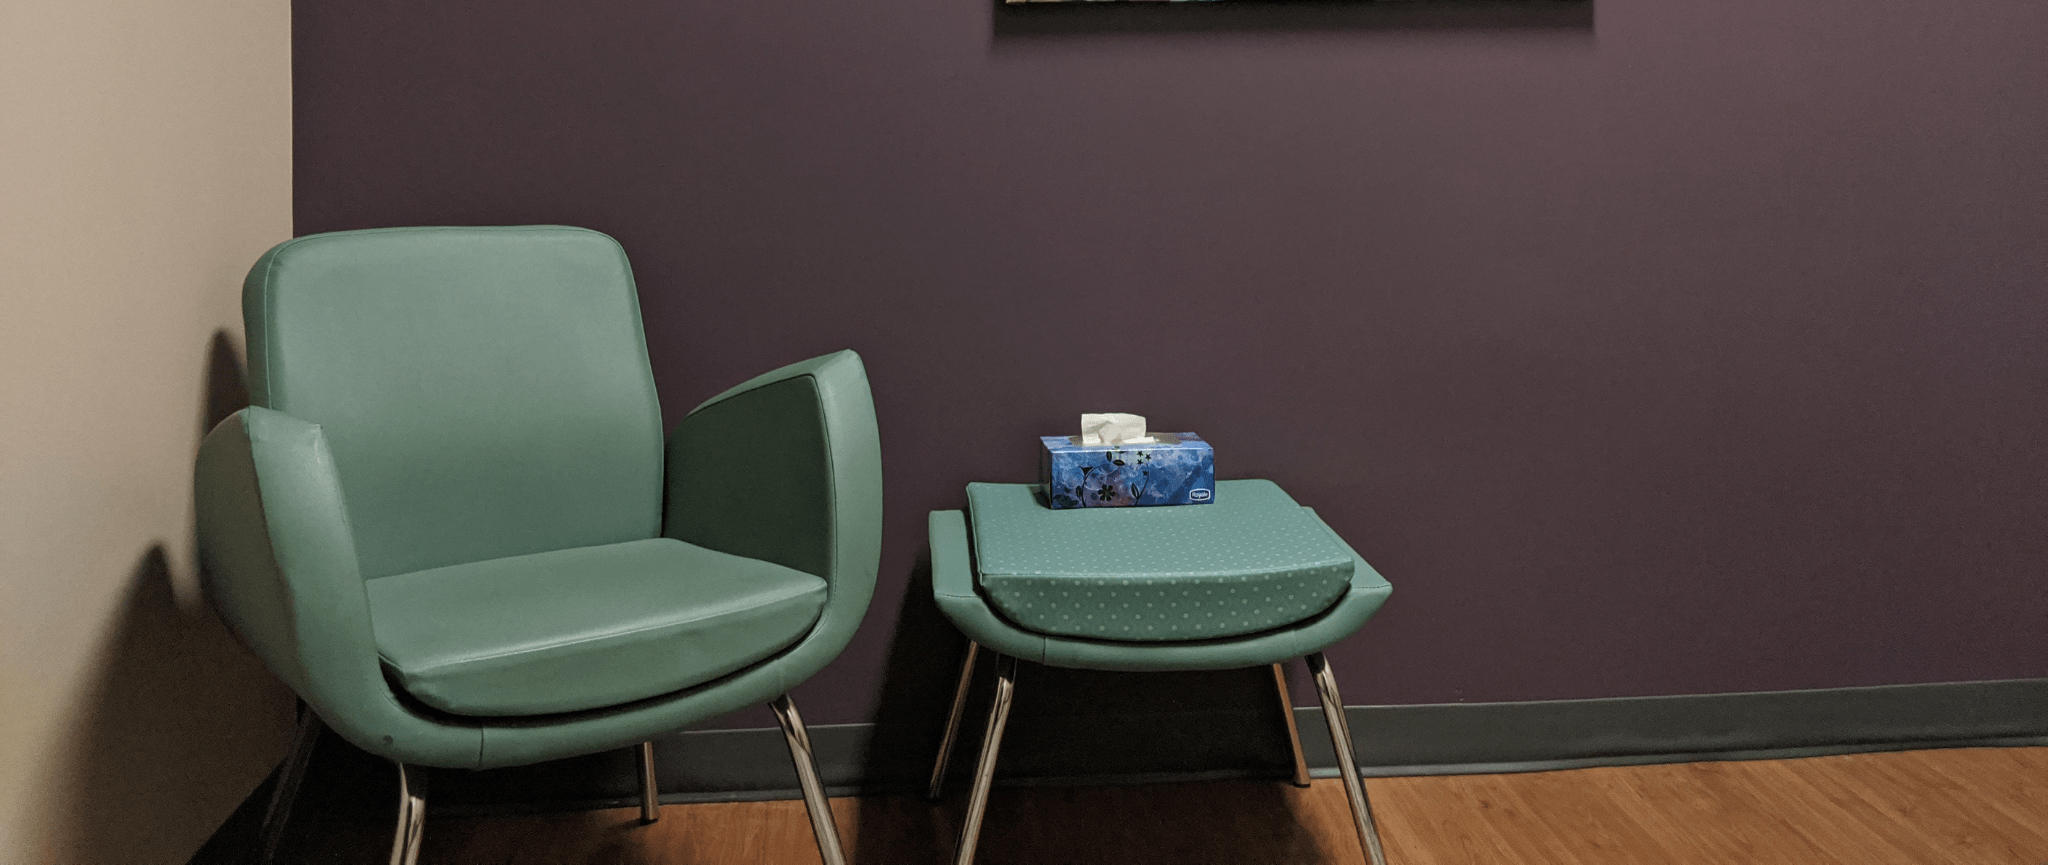 A green chair and floral painting inside an FSWE counselling office